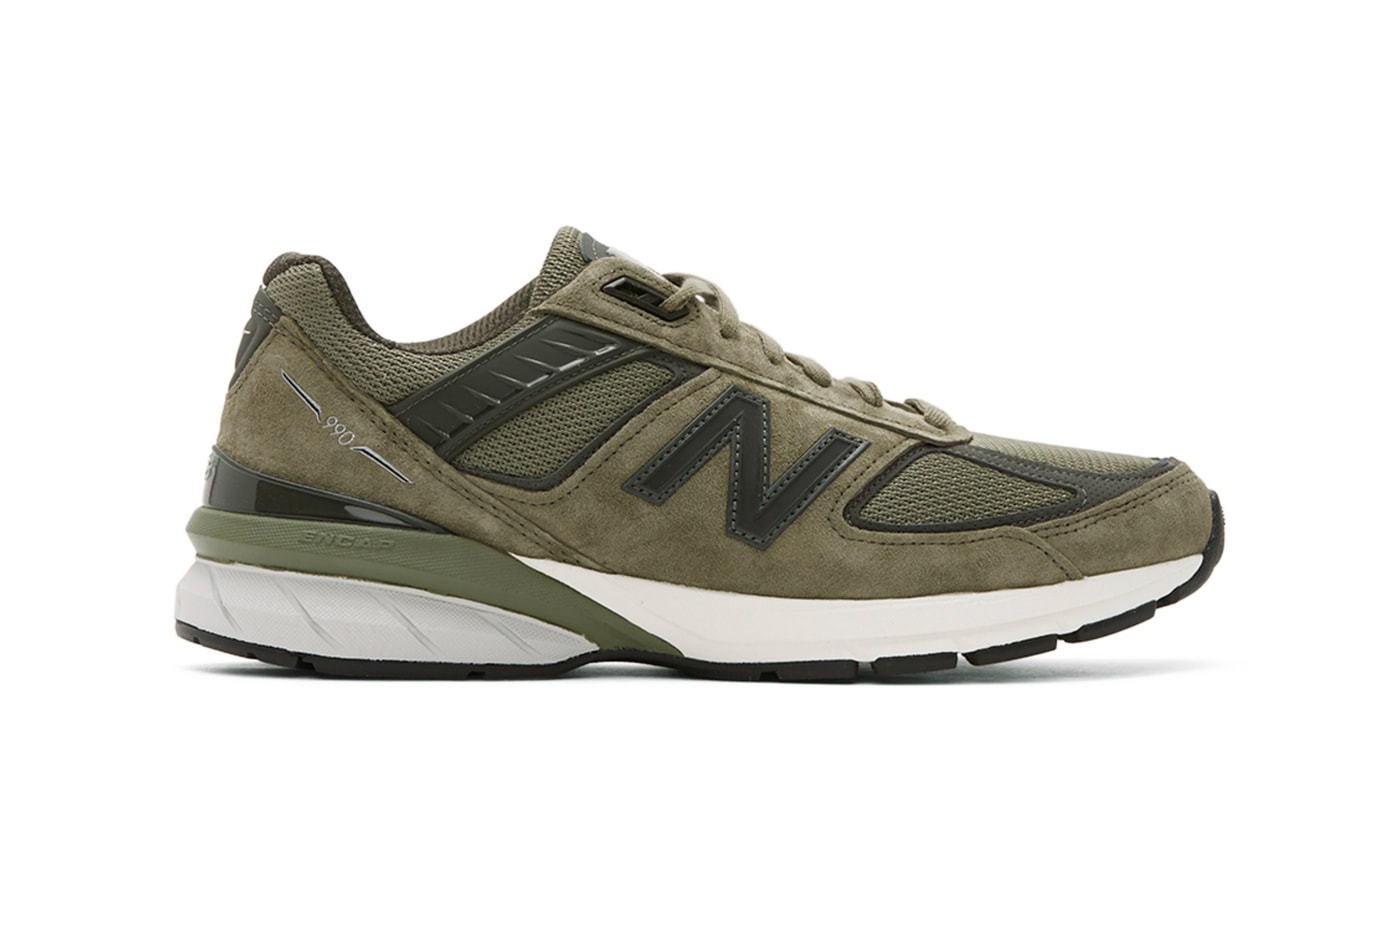 New Balance 990v5 Made in USA Covert Green m990ae5 suede mesh olive legends collection